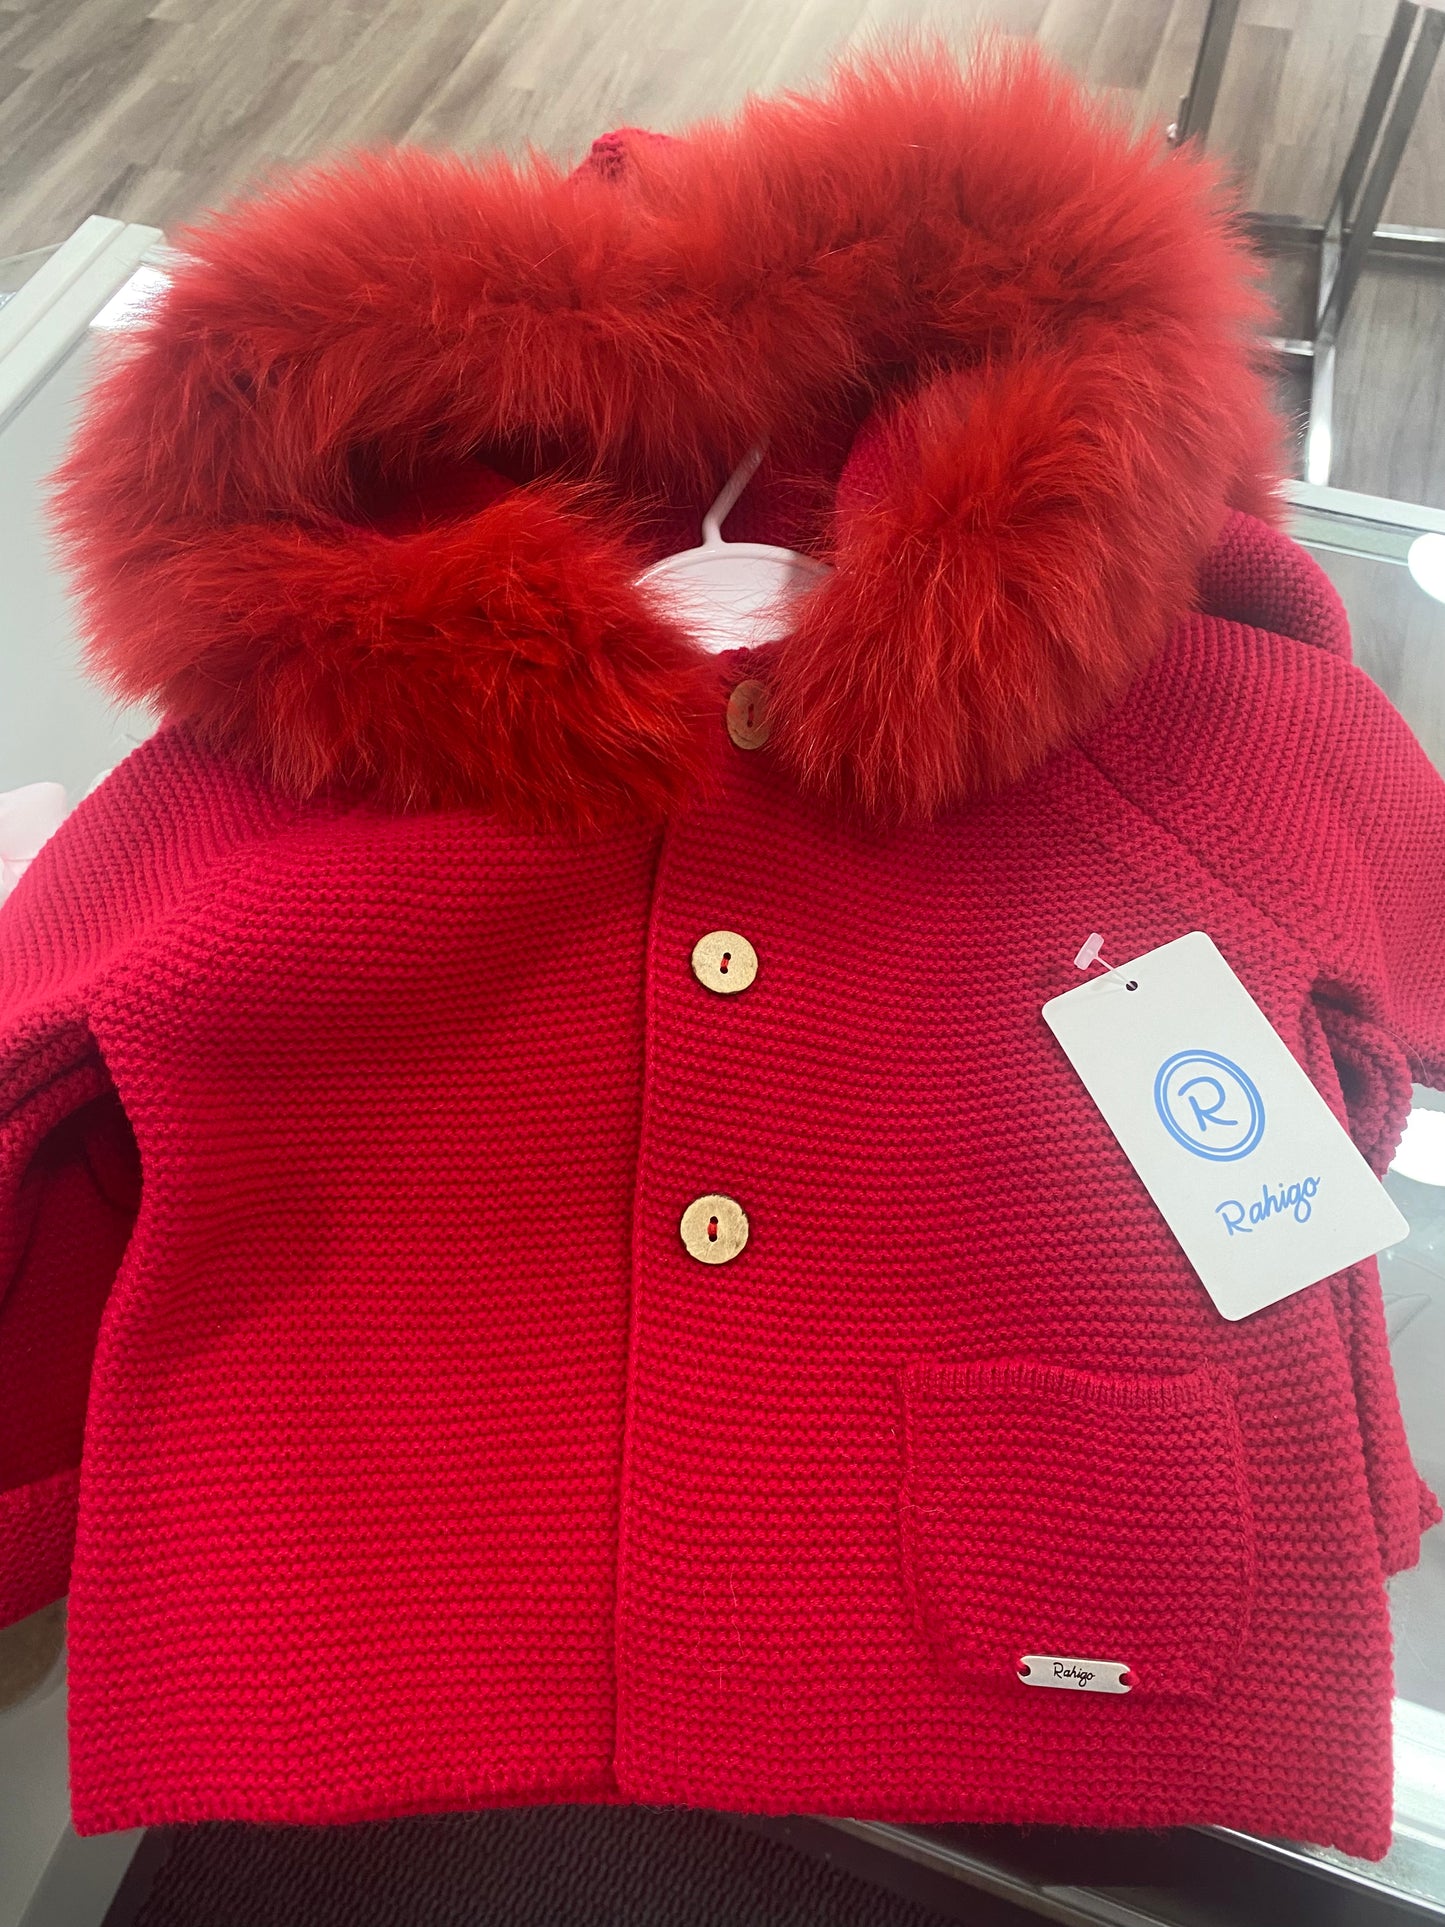 Rahigo Red Knitted Jacket With Hood AW